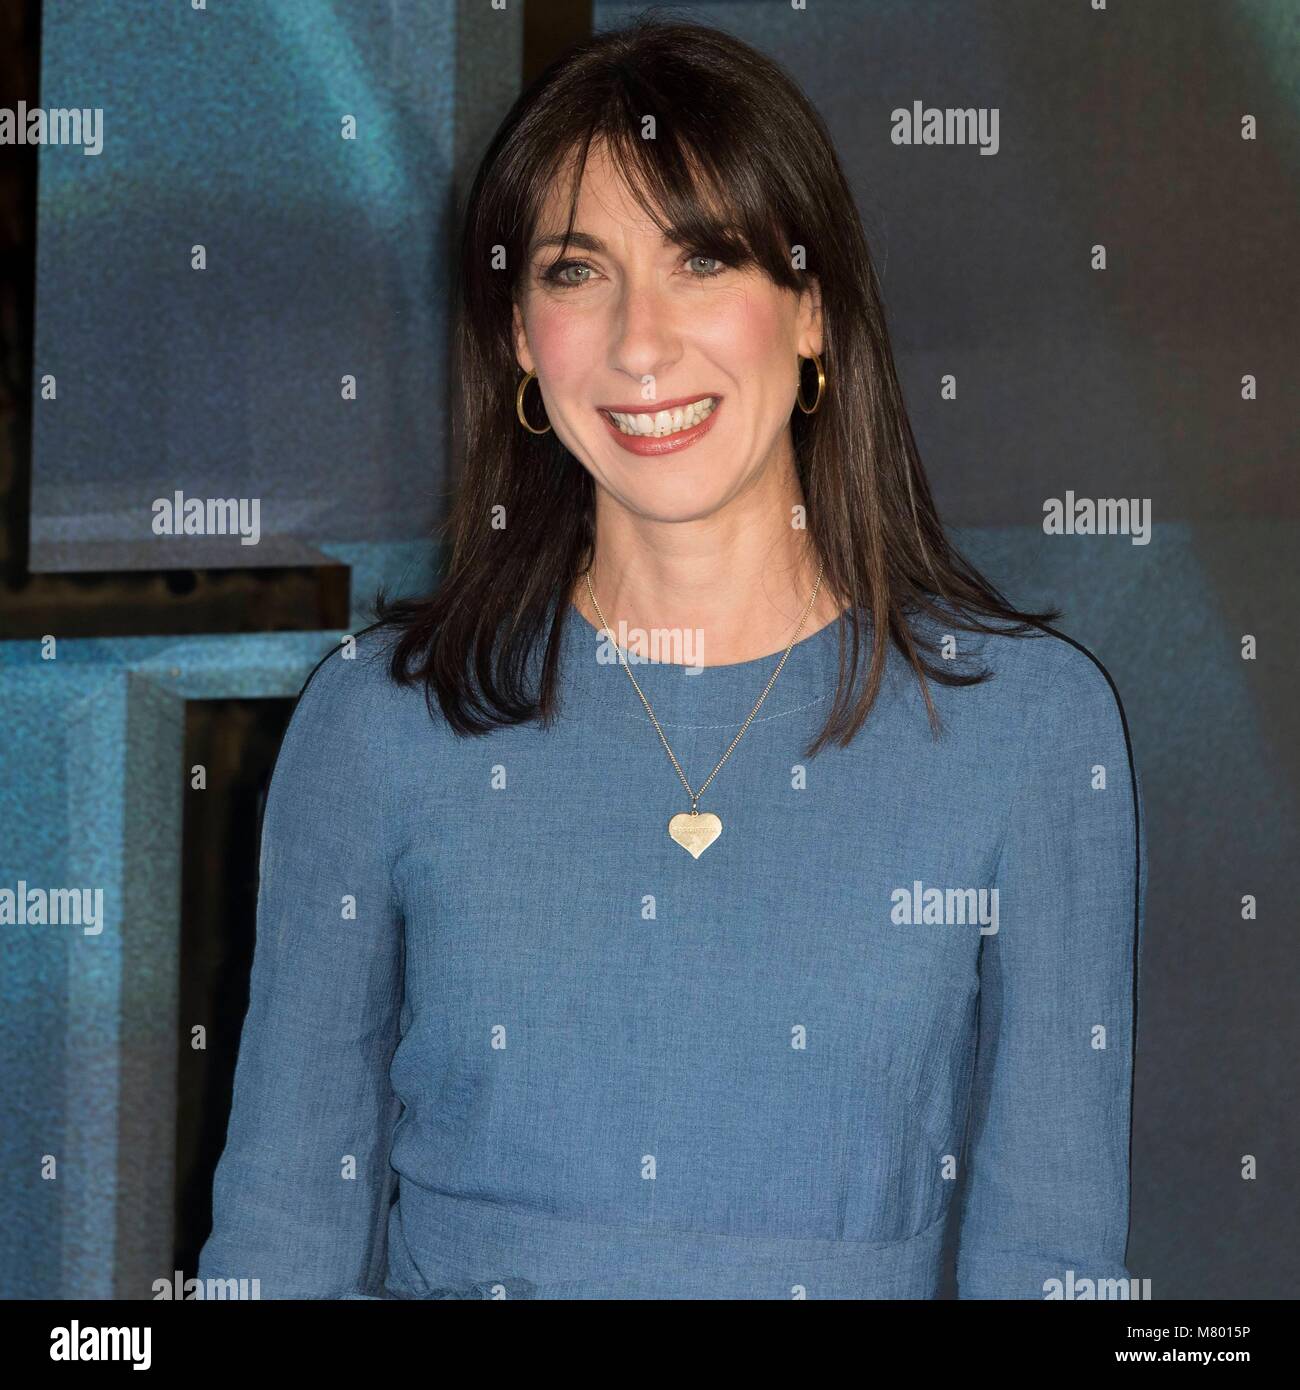 Samantha cameron hi-res stock photography and images - Alamy